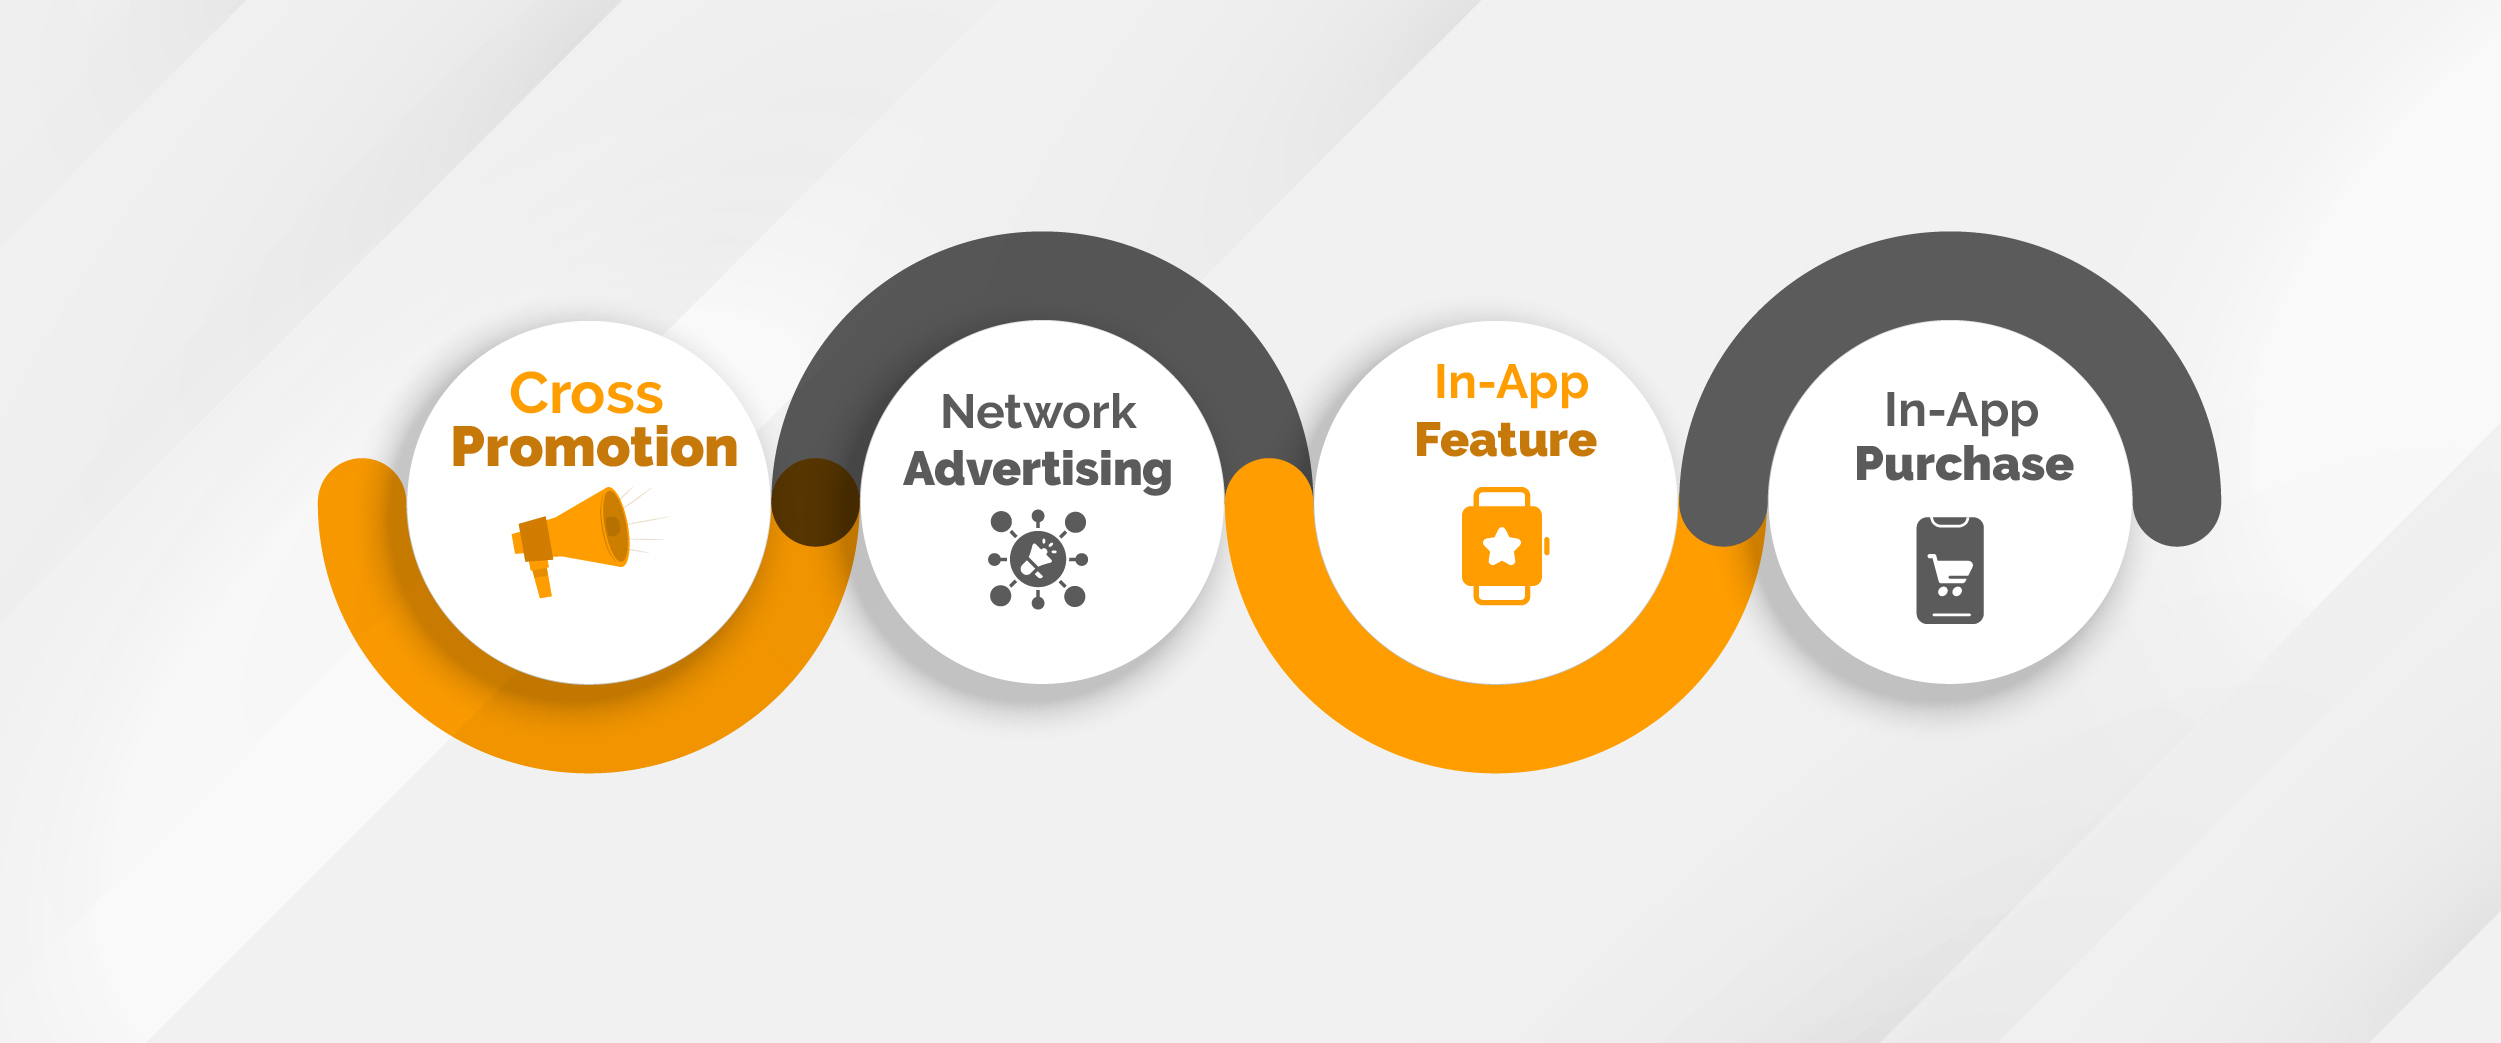 Creative In-App Advertising Campaigns and Upselling Ad Formats